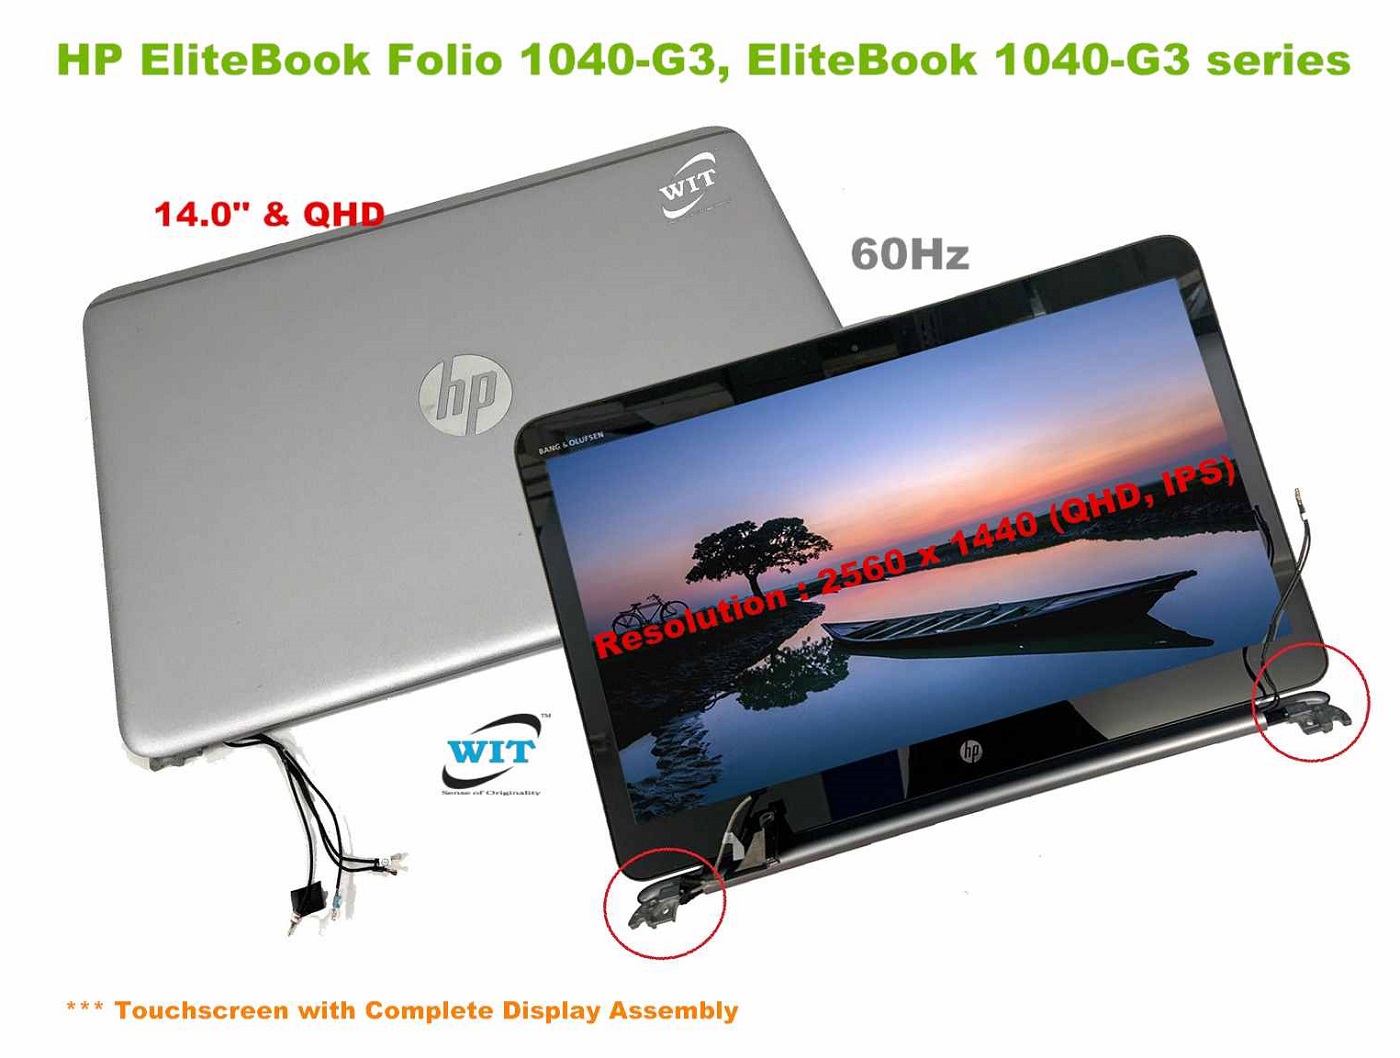 rol knal Denken 14.0-inch Touchscreen with Complete Display Assembly for HP EliteBook Folio  1040-G3, EliteBook 1040-G3 series, Assembly color : Natural Silver,  Resolution : 2560 x 1440 (QHD, IPS), Frequency: 60Hz, P/N : 844386-001,  B140QAN01.1, 849783-001 - WIT Computers